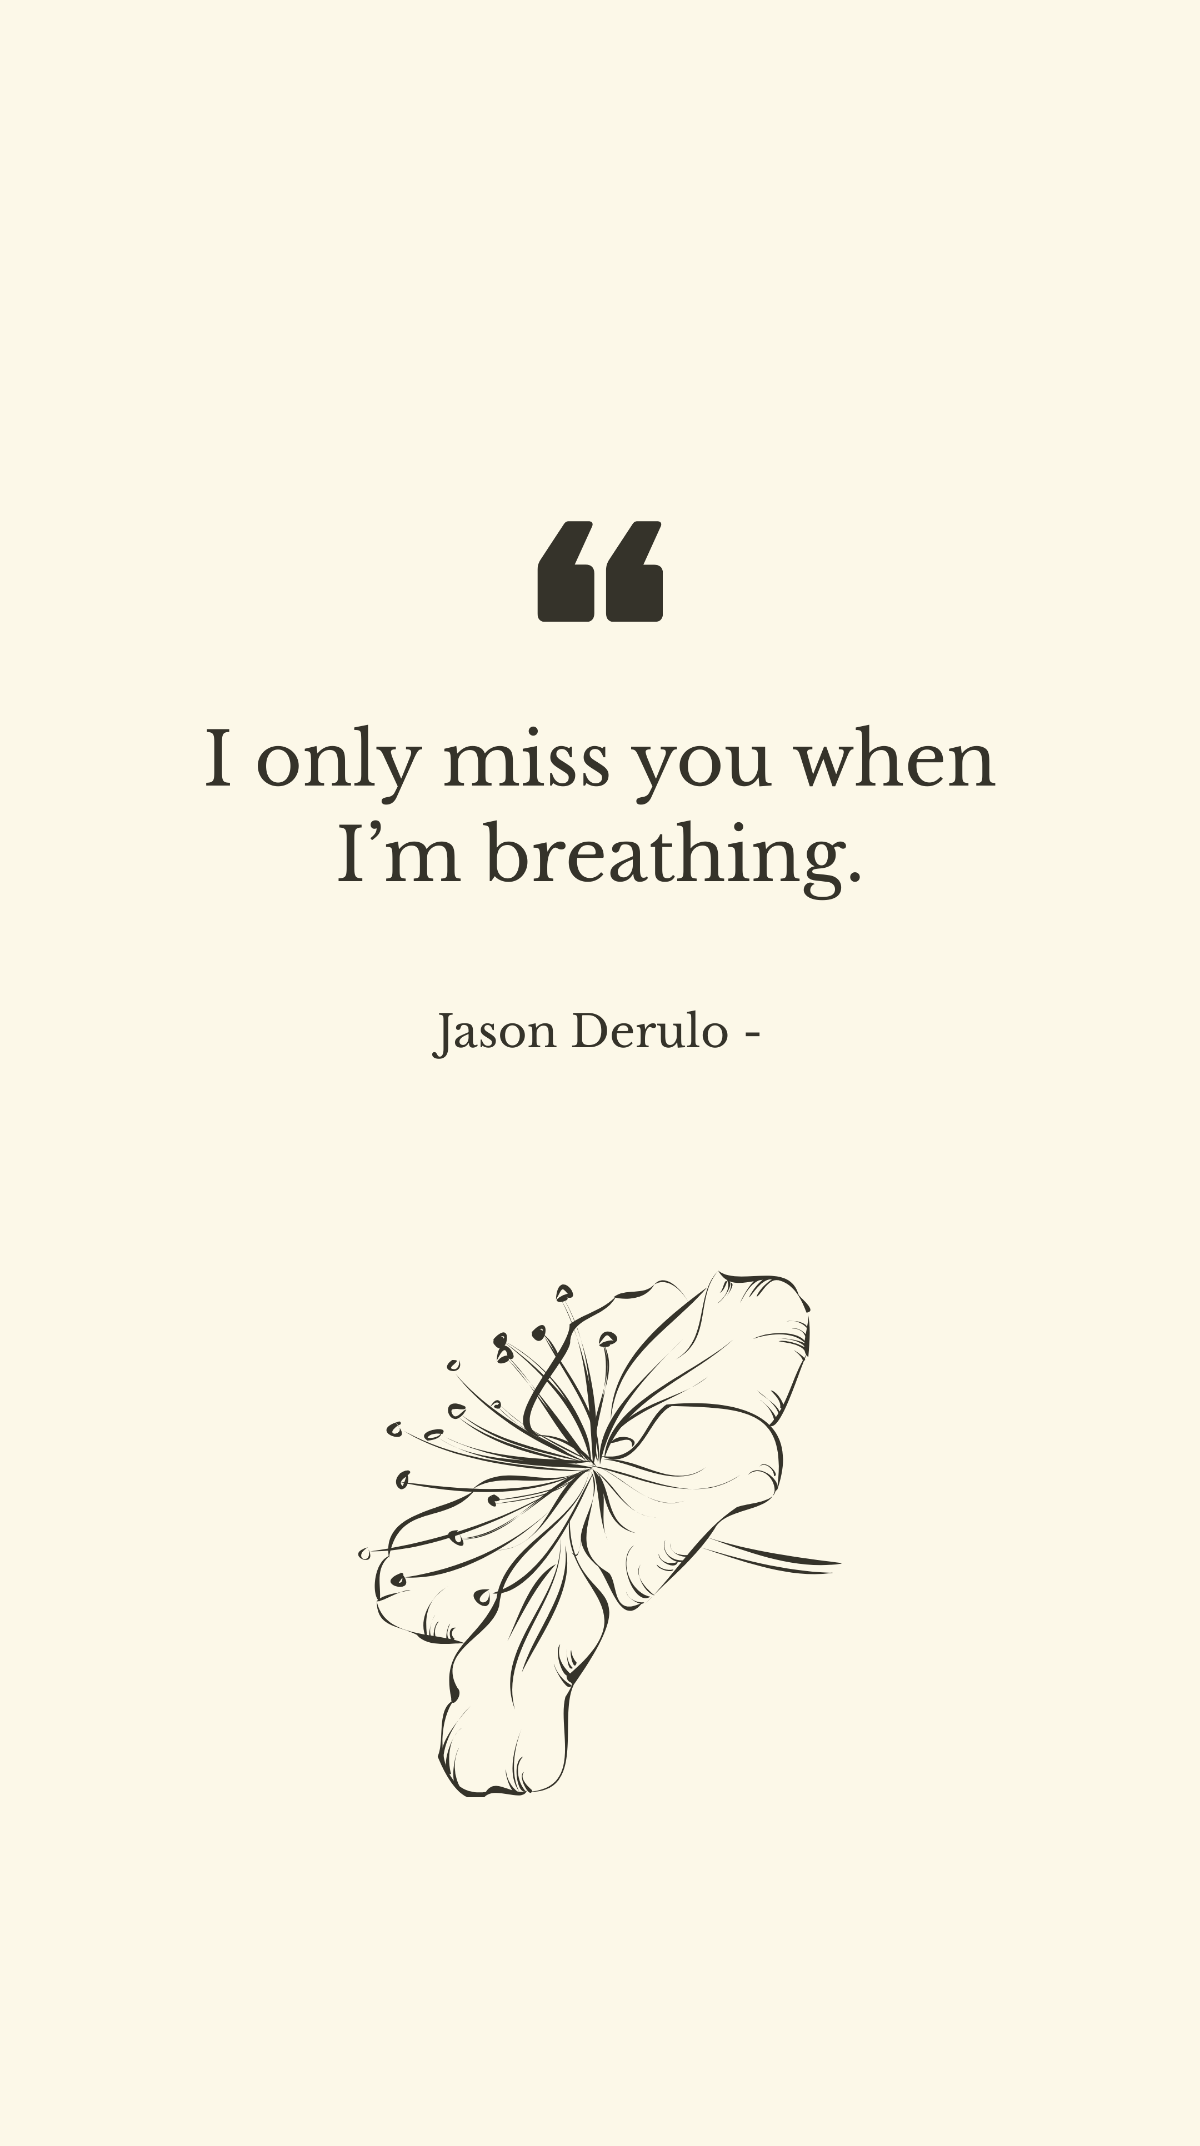 Free Jason Derulo - I only miss you when I’m breathing. Template